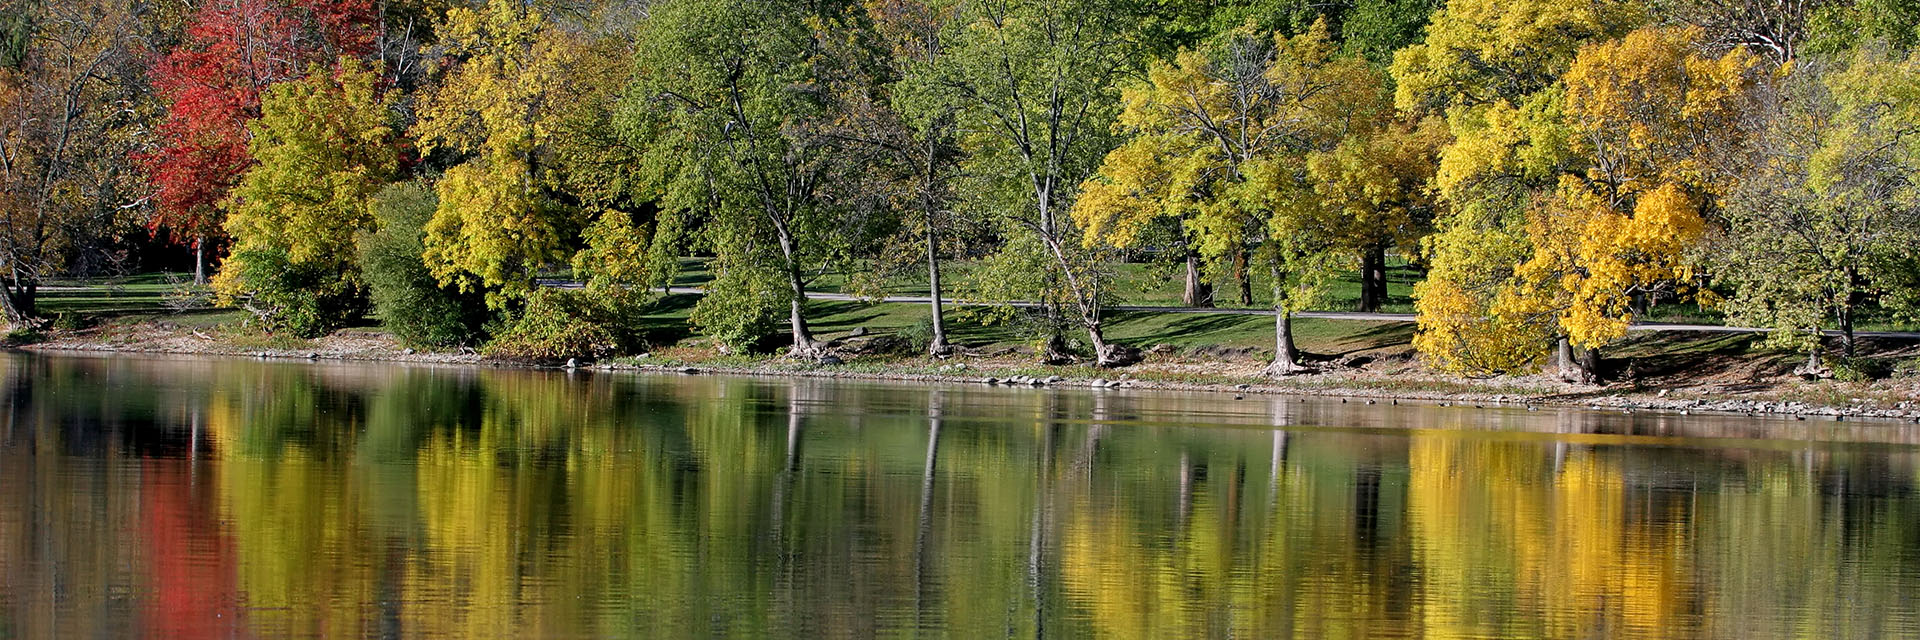 Lake with trees in fall